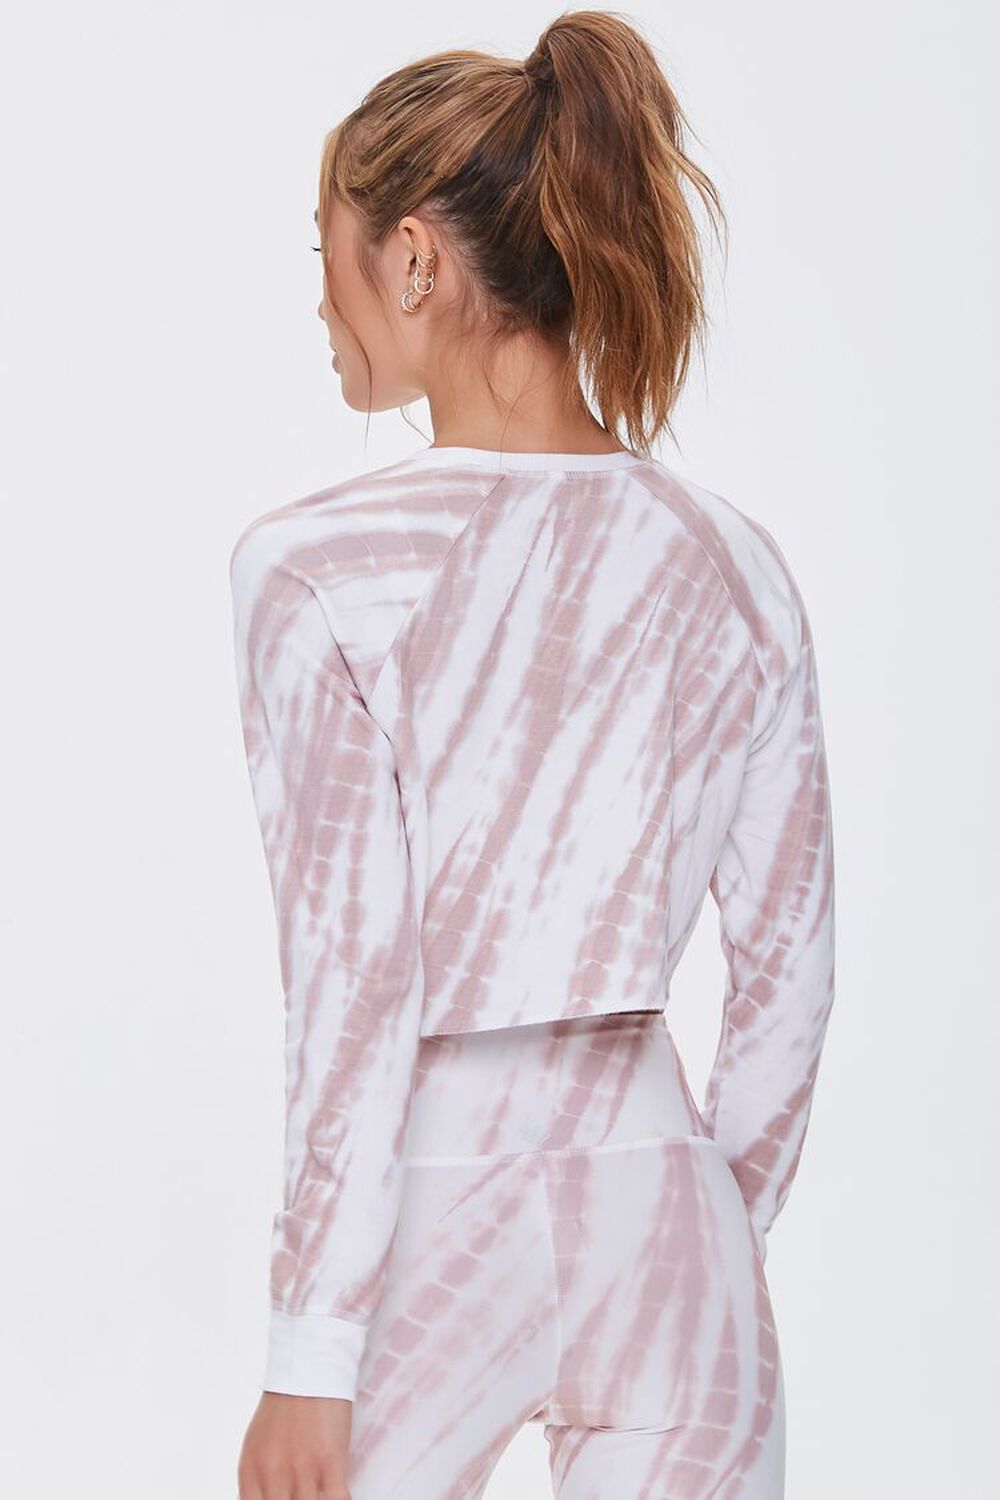 ROSE/WHITE Active Tie-Dye Pullover, image 3